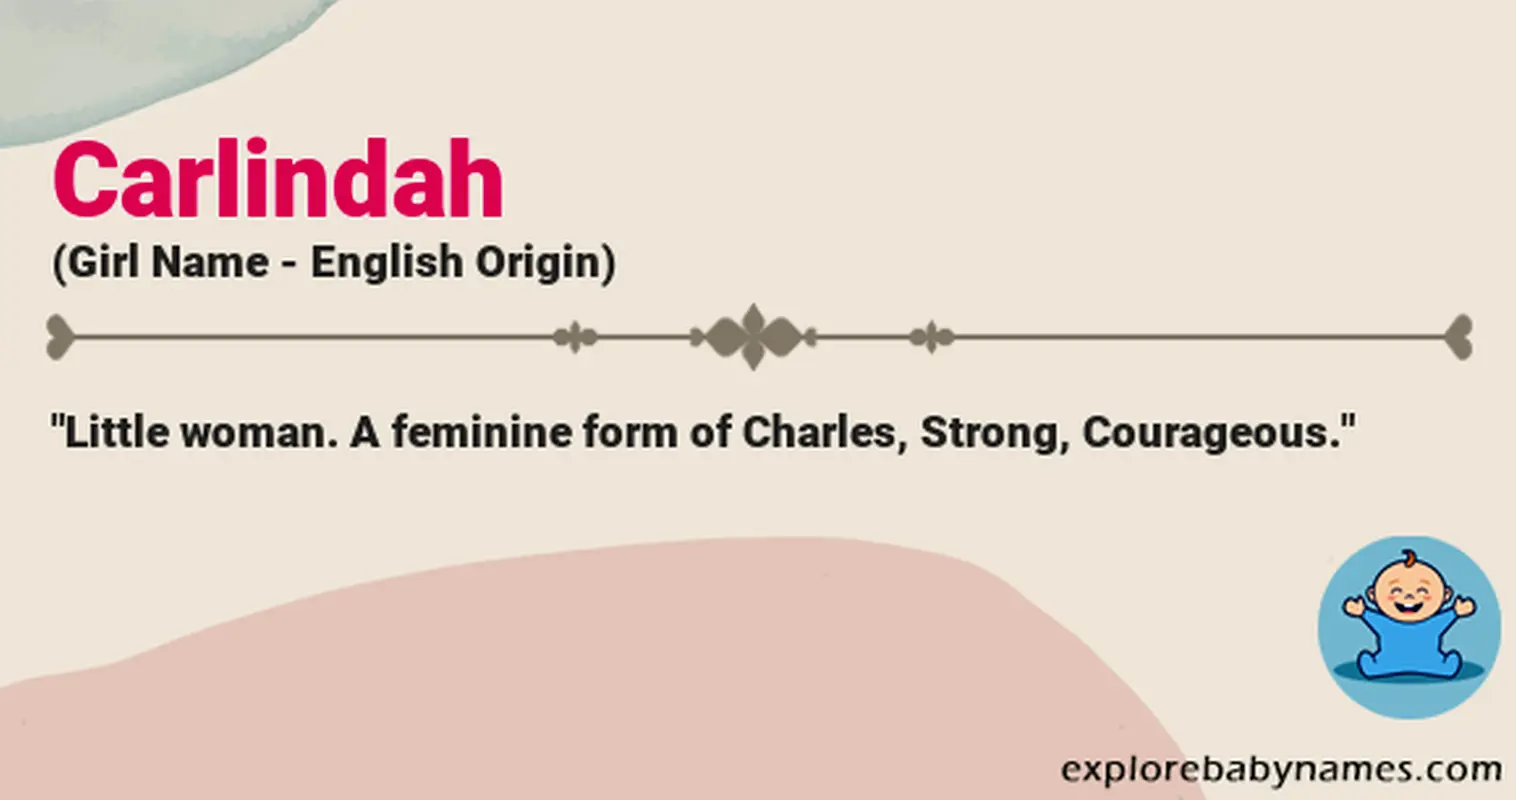 Meaning of Carlindah